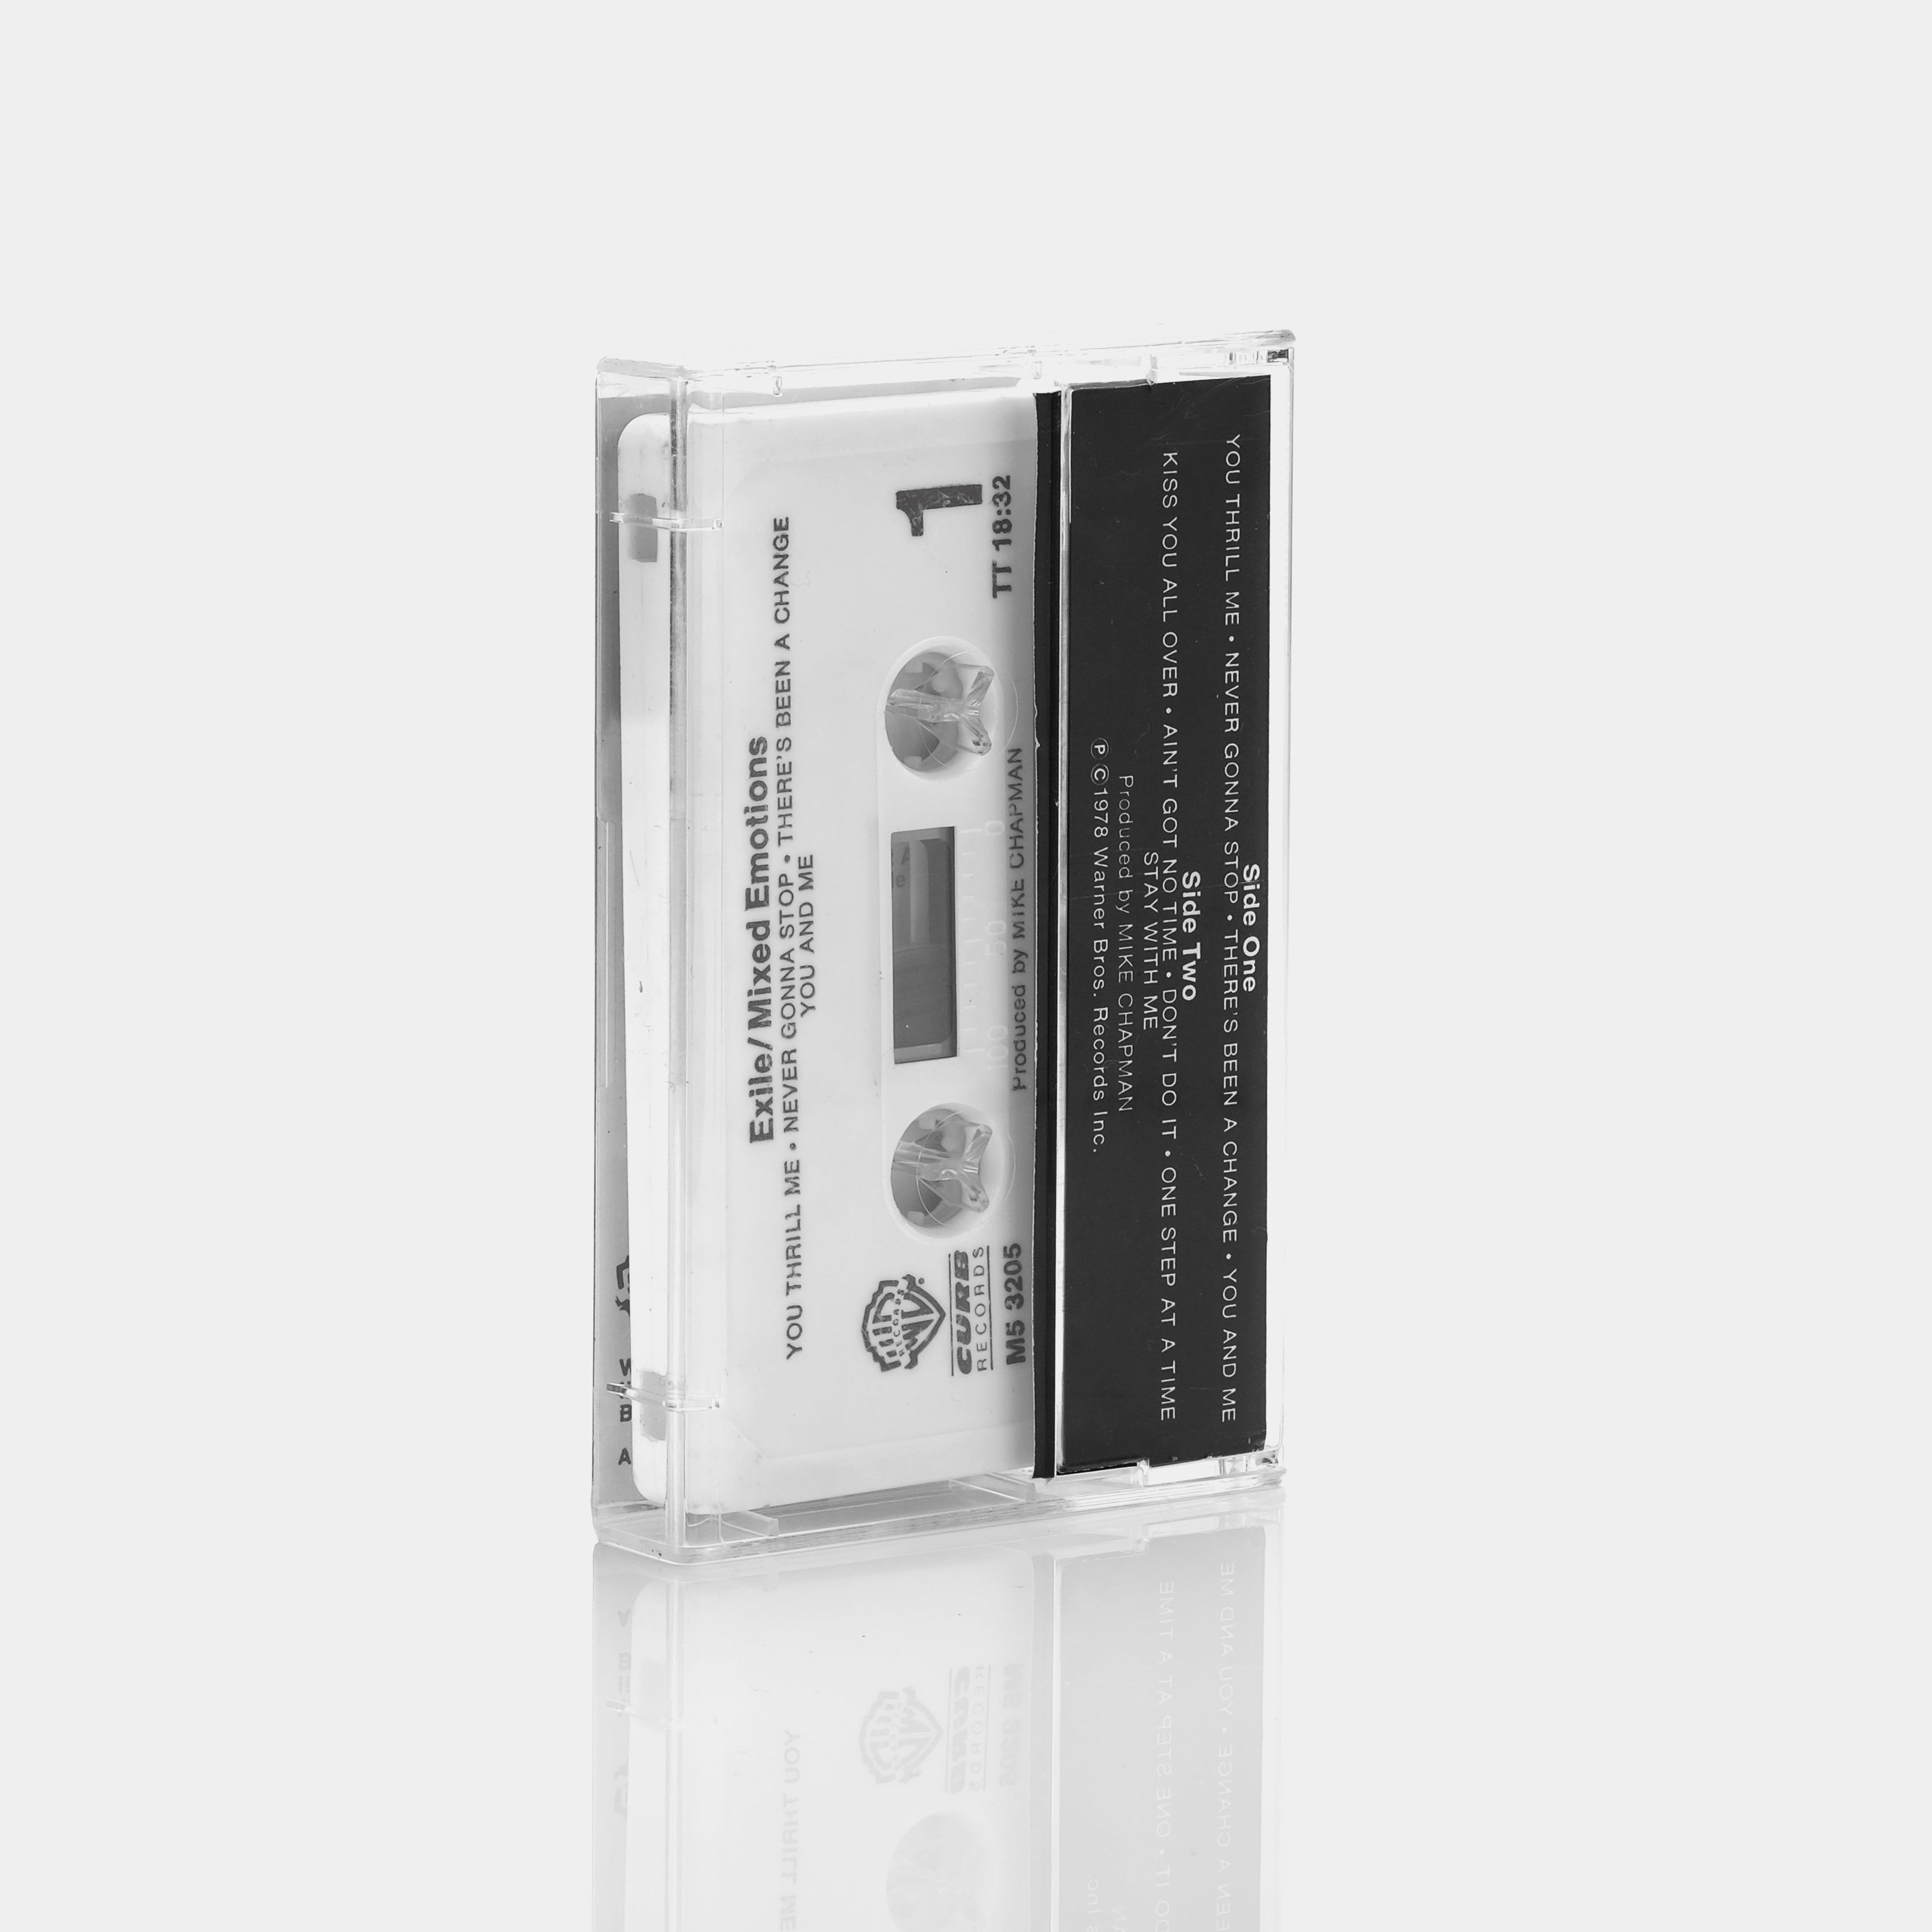 Exile - Mixed Emotions Cassette Tape